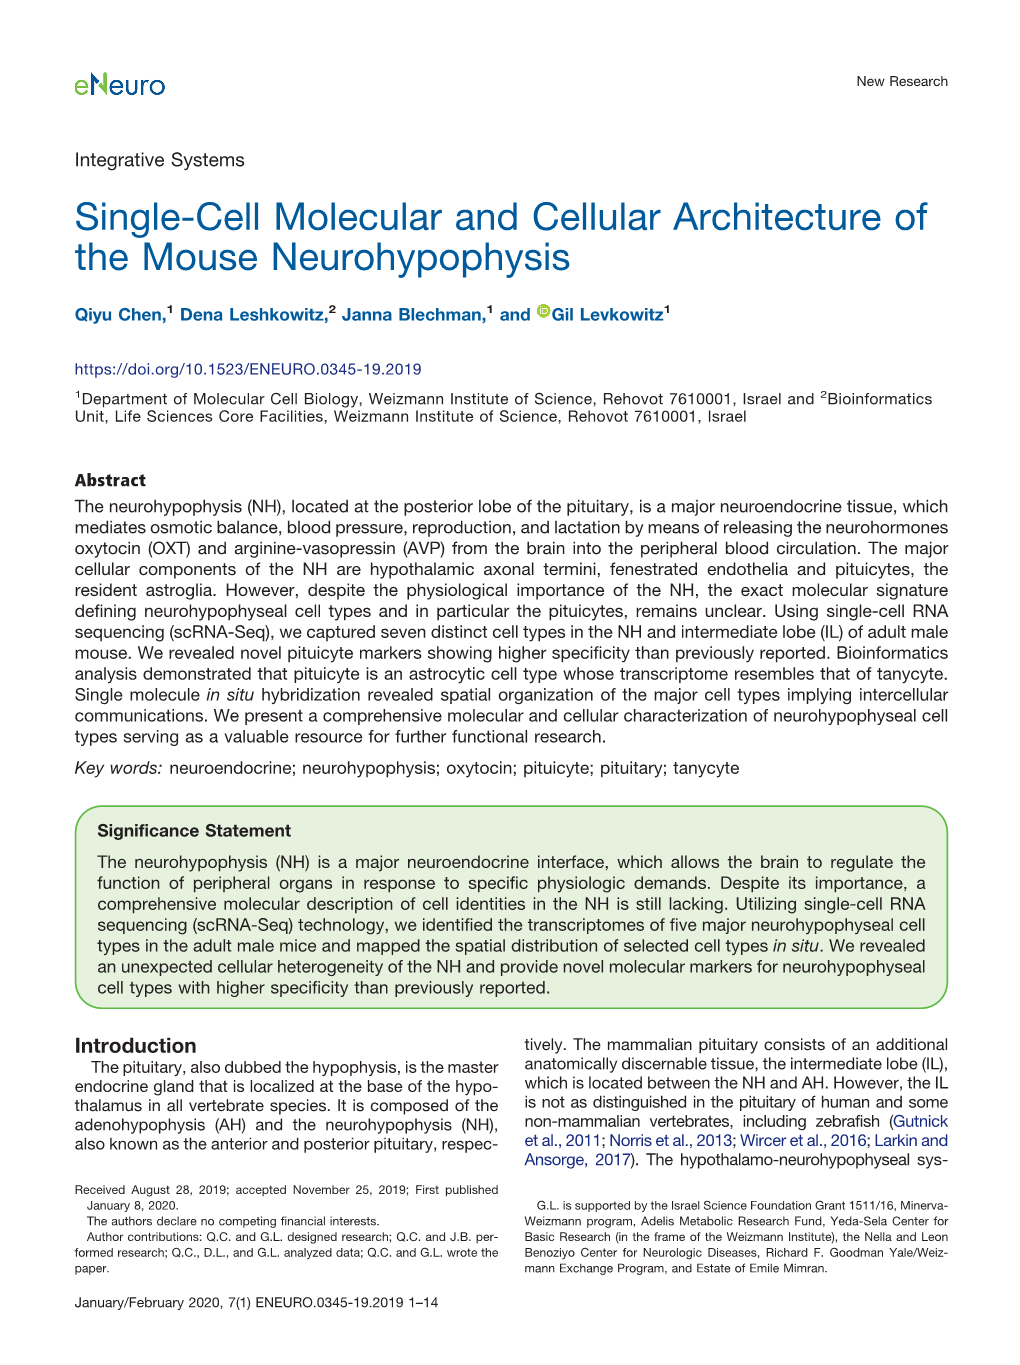 Single-Cell Molecular and Cellular Architecture of the Mouse Neurohypophysis